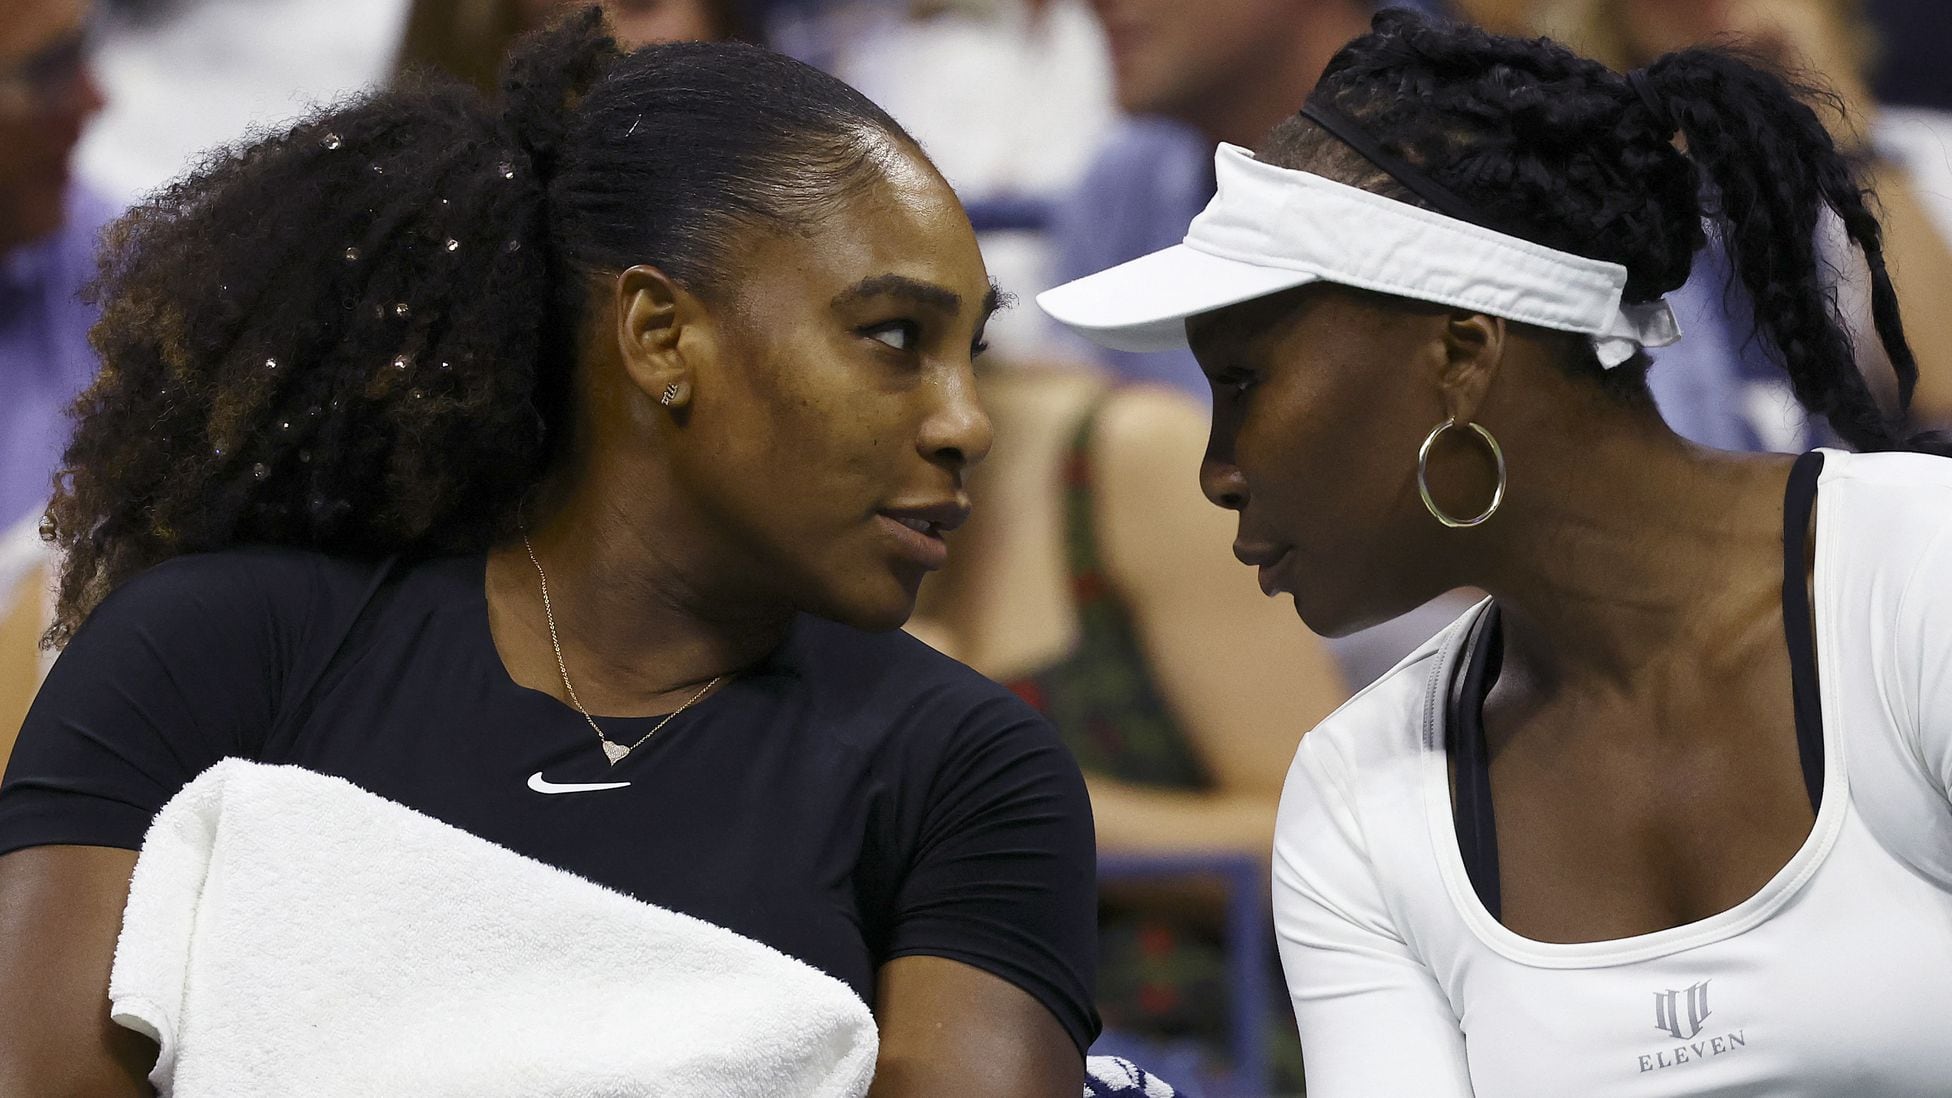 What is Venus Williams' net worth compared to the Serenas' in 2022?